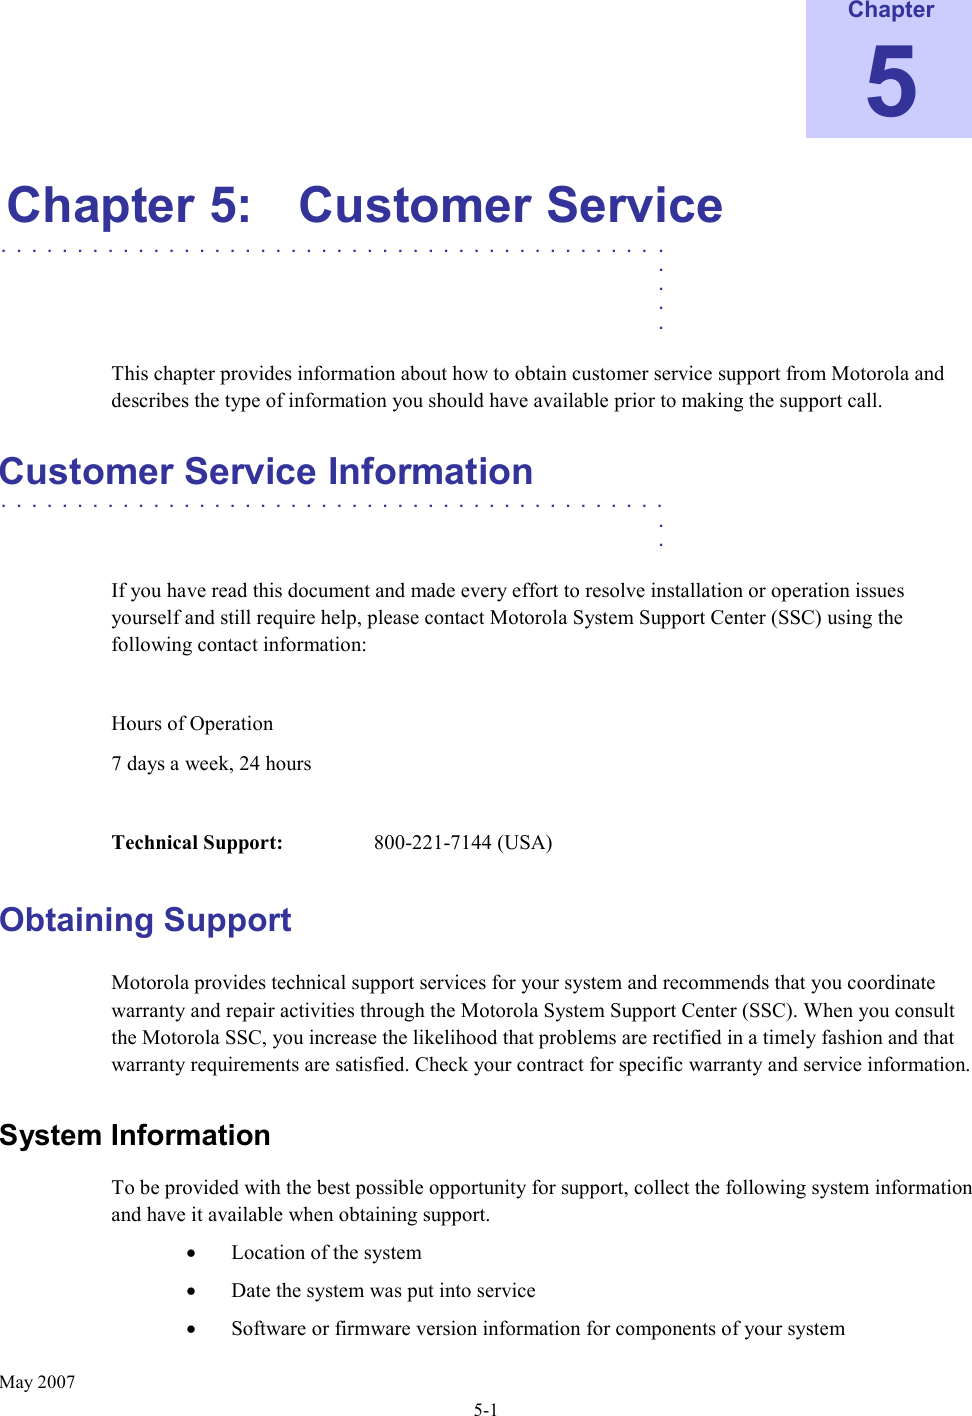      May 2007 5-1 Chapter 5 Chapter 5:  Customer Service ............................................   .    .    .    .  This chapter provides information about how to obtain customer service support from Motorola and describes the type of information you should have available prior to making the support call. Customer Service Information ............................................   .    .  If you have read this document and made every effort to resolve installation or operation issues yourself and still require help, please contact Motorola System Support Center (SSC) using the following contact information:  Hours of Operation 7 days a week, 24 hours  Technical Support:    800-221-7144 (USA) Obtaining Support Motorola provides technical support services for your system and recommends that you coordinate warranty and repair activities through the Motorola System Support Center (SSC). When you consult the Motorola SSC, you increase the likelihood that problems are rectified in a timely fashion and that warranty requirements are satisfied. Check your contract for specific warranty and service information. System Information  To be provided with the best possible opportunity for support, collect the following system information and have it available when obtaining support. • Location of the system • Date the system was put into service • Software or firmware version information for components of your system 